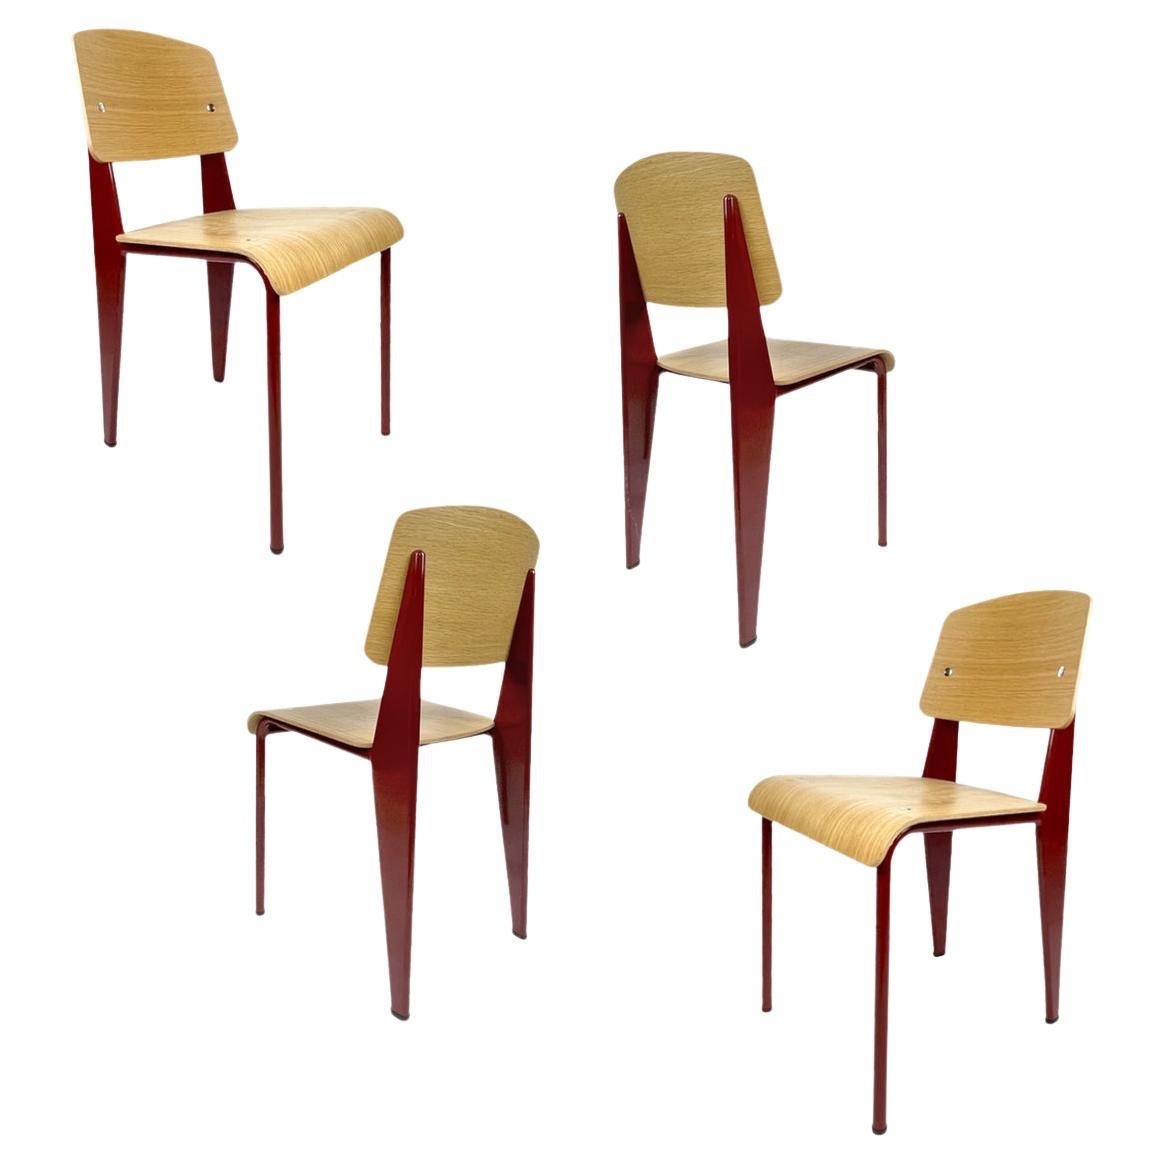 Jean Prouvé Dining Chair Japanese Red Steel and Natural Oak by Vitra (3 avail)